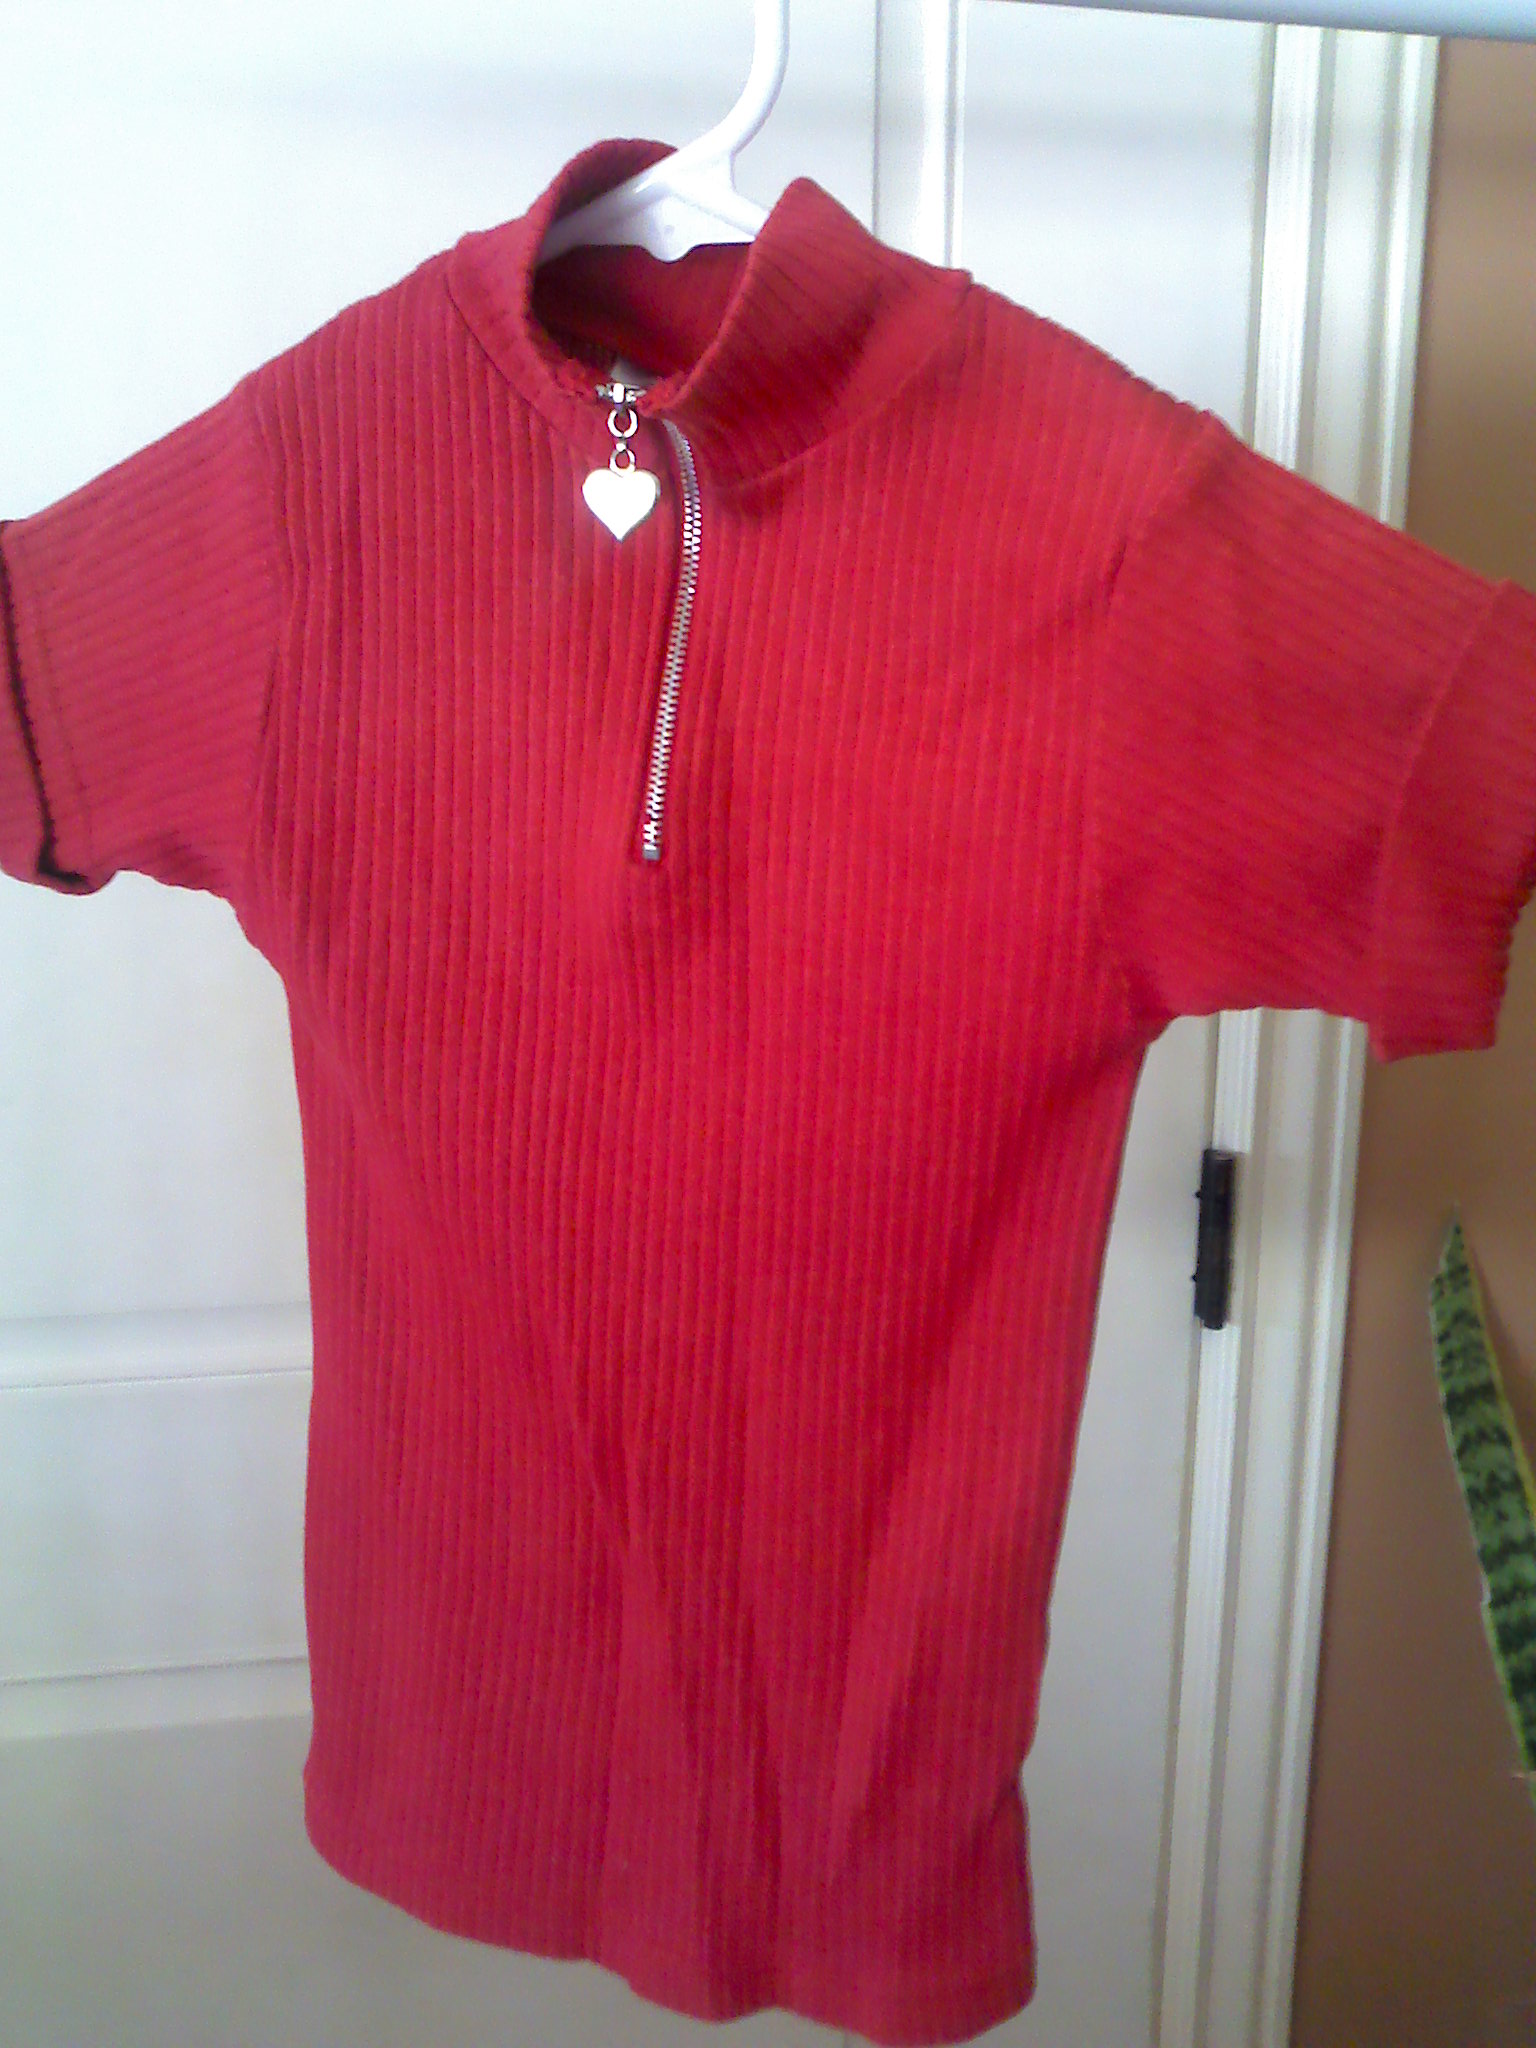 Red Girls blouse size 7-8 wears small